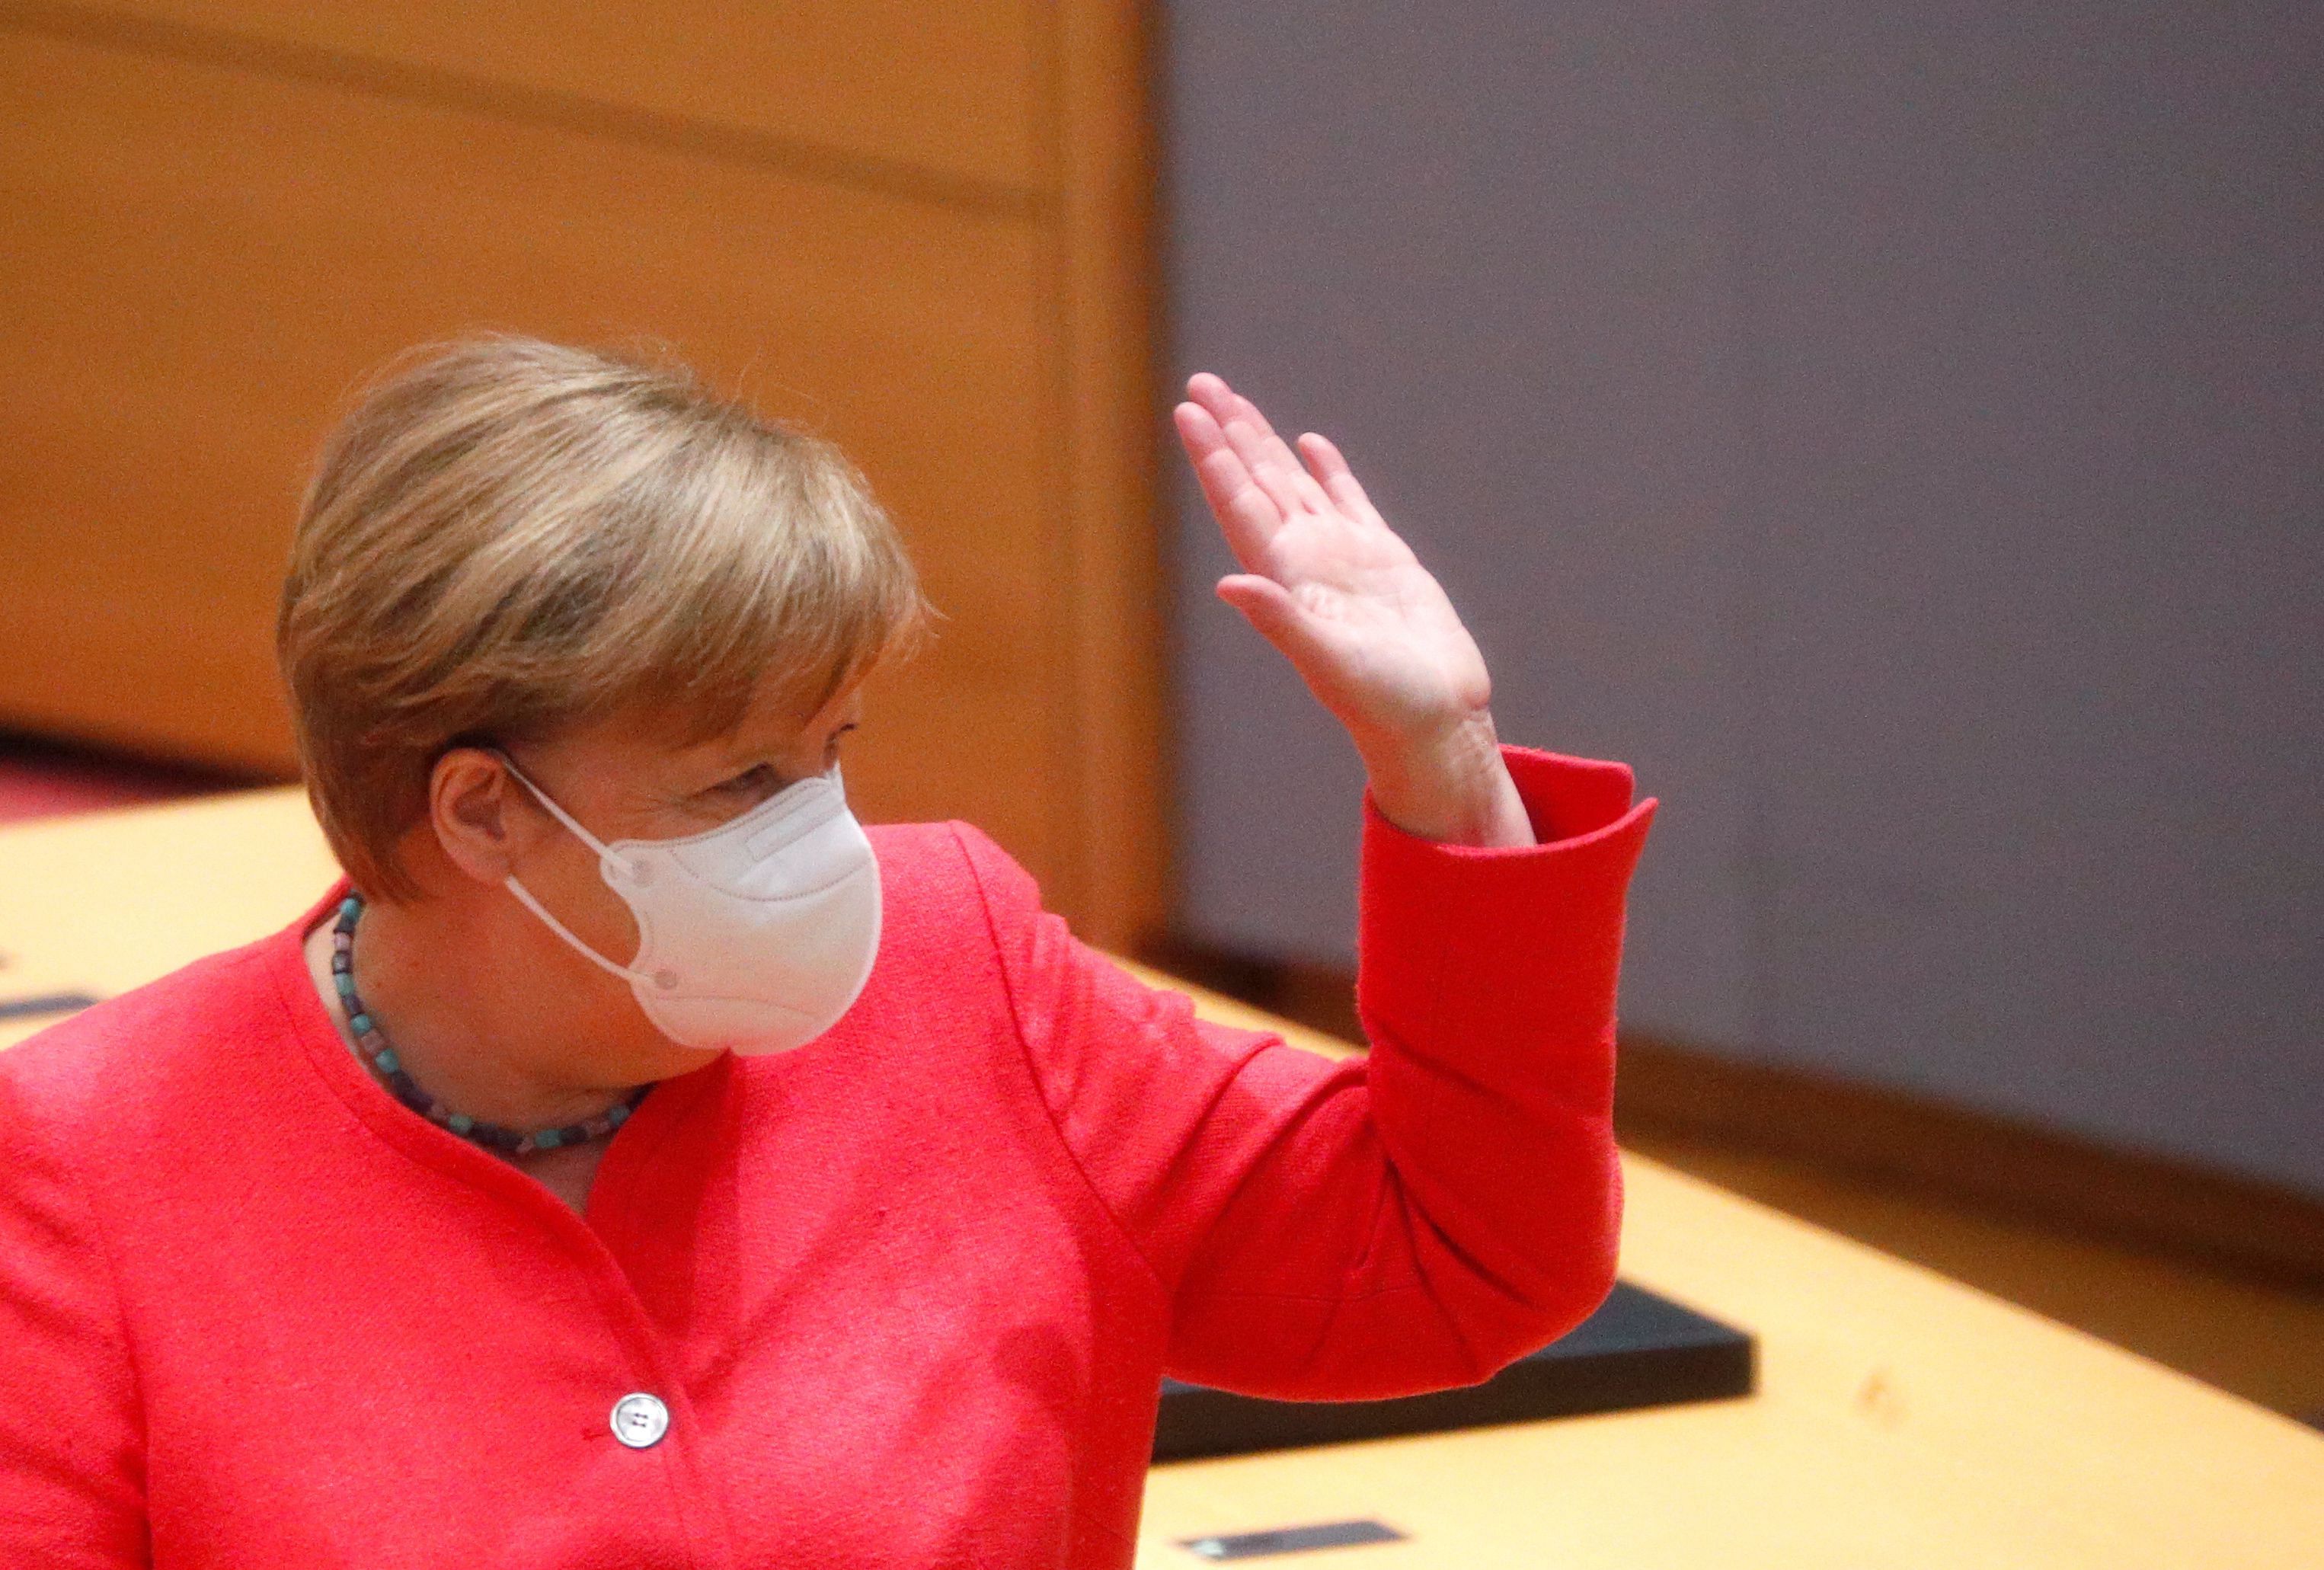 German Chancellor Angela Merkel waves at the start of the first face-to-face EU summit since the coronavirus disease (COVID-19) outbreak, in Brussels, Belgium July 17, 2020. Credit: REUTERS